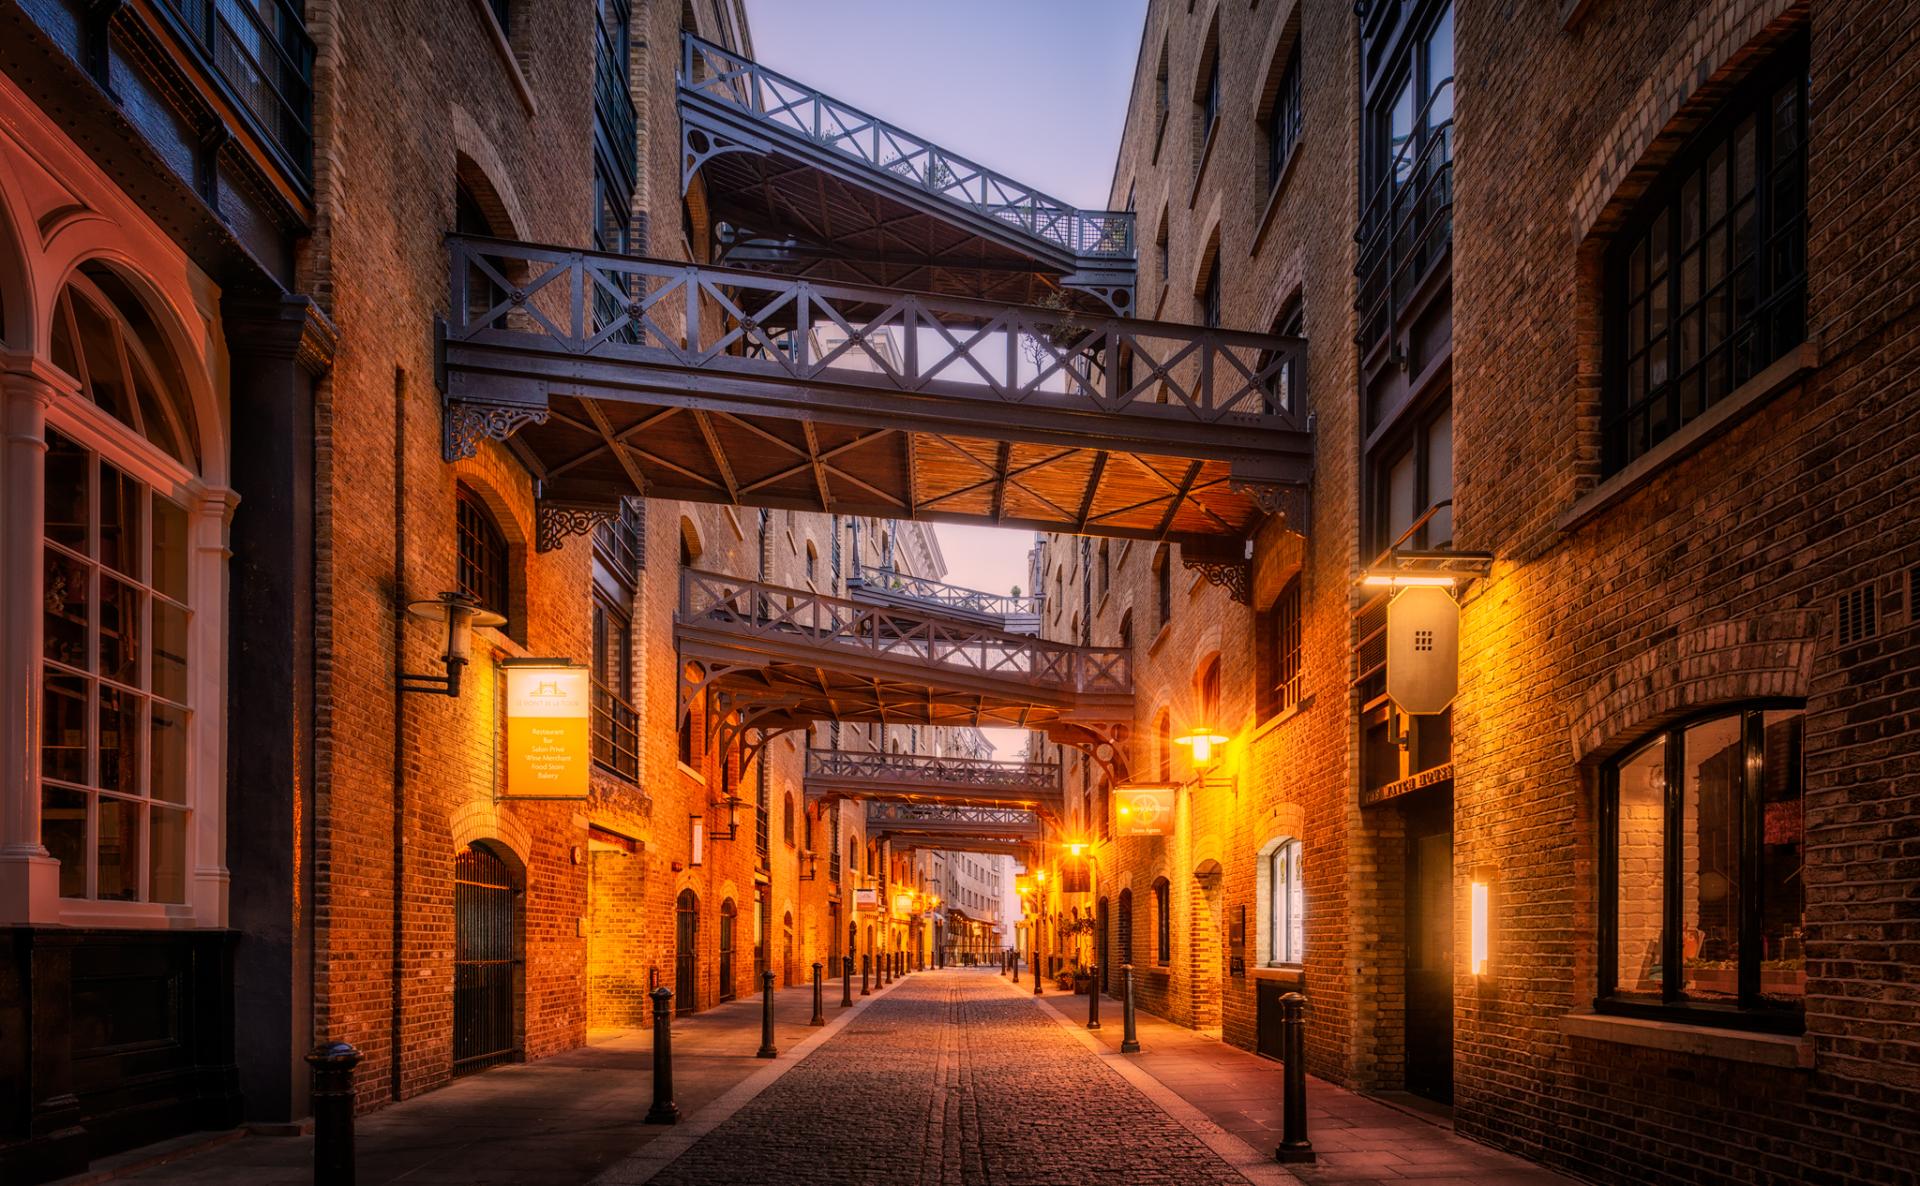 New York Photography Awards Winner - Old trade traces – London Shad Thames